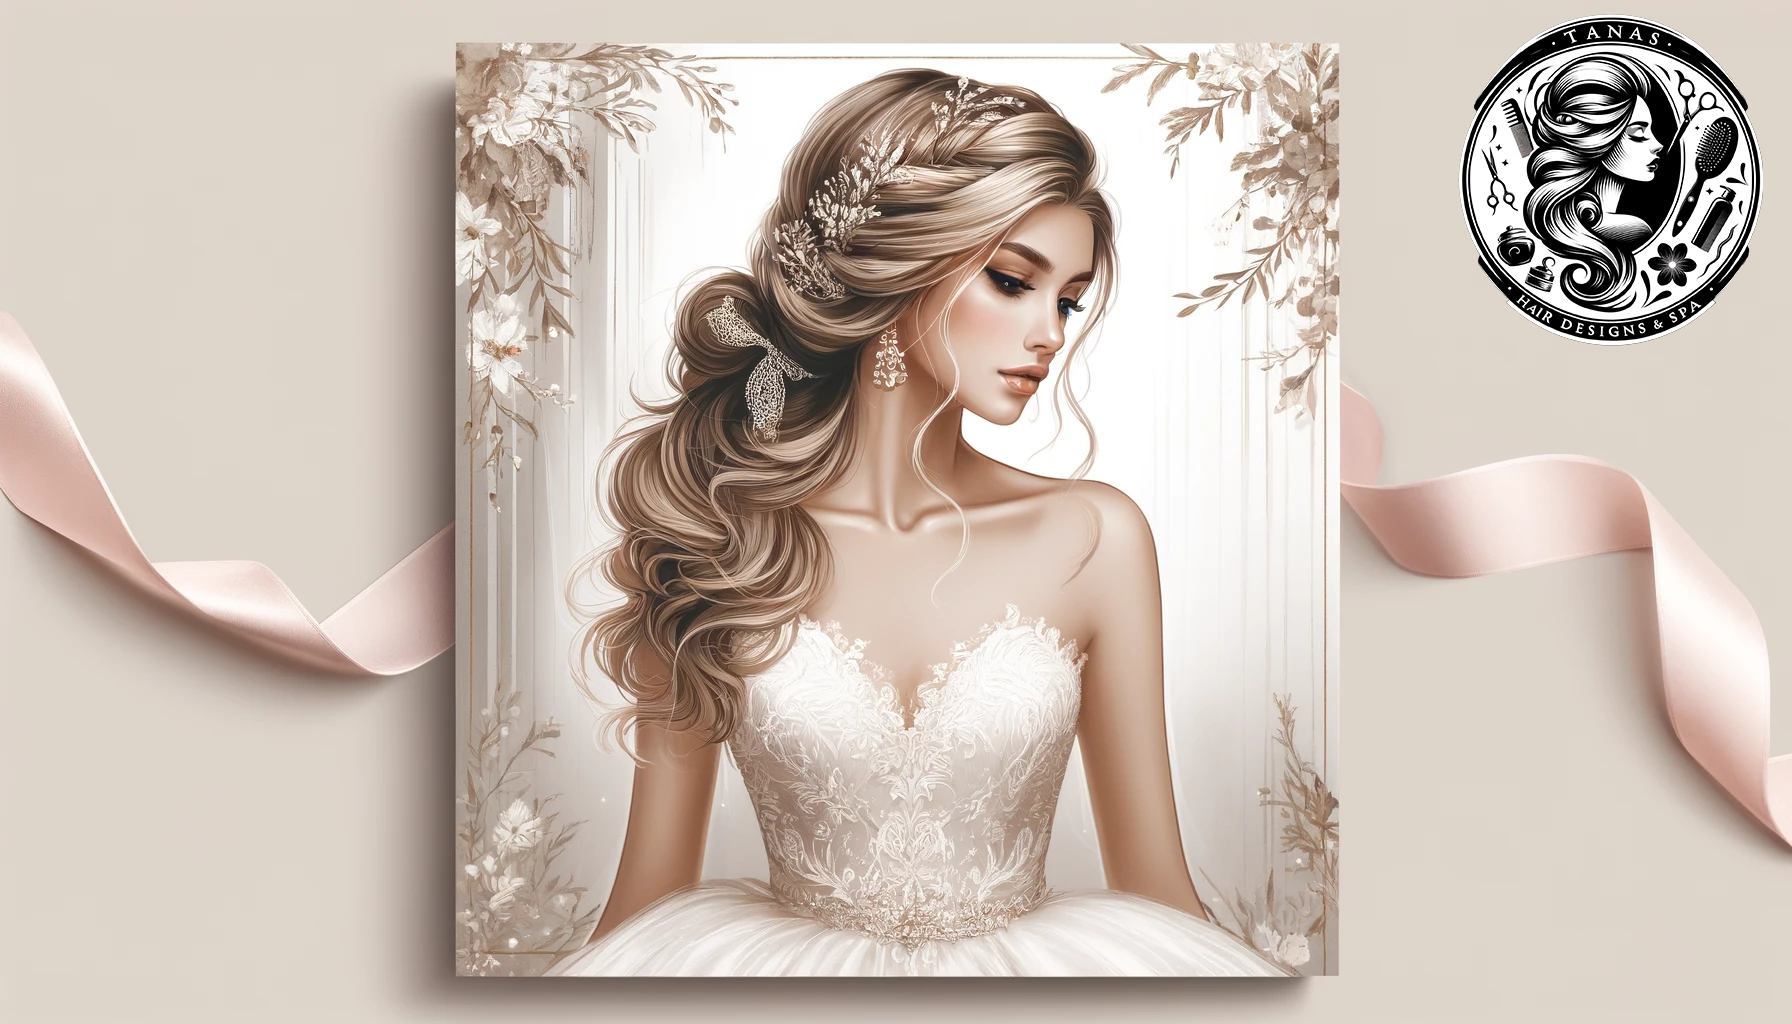 Perfecting Your Look: Choosing Hairstyles and Makeup for Your Wedding Day